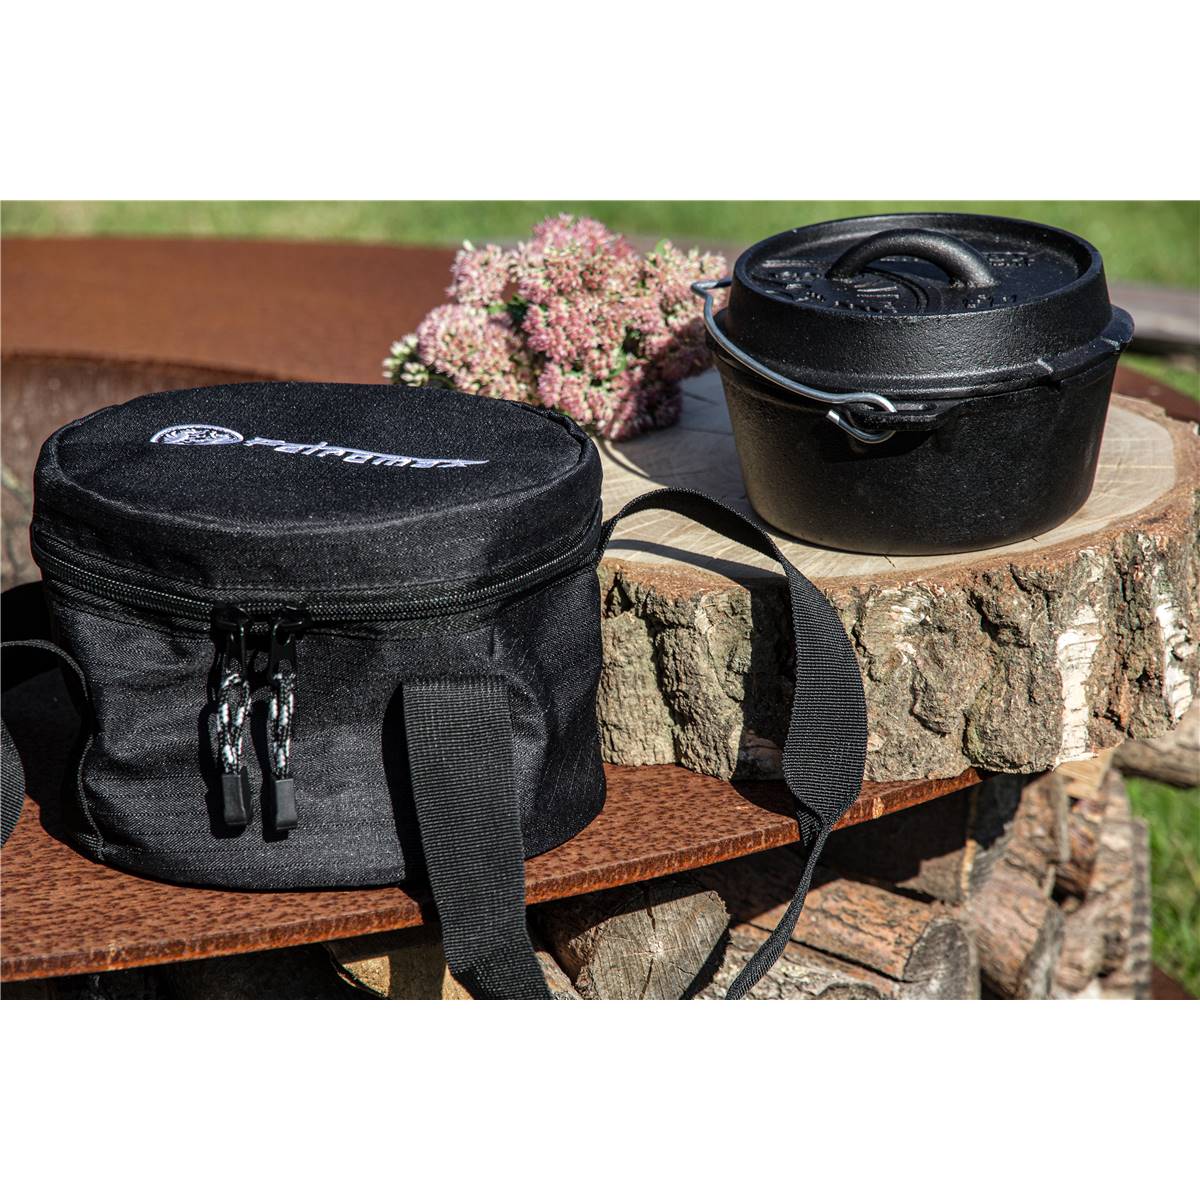 Carrying bag for cooking pot - ft1